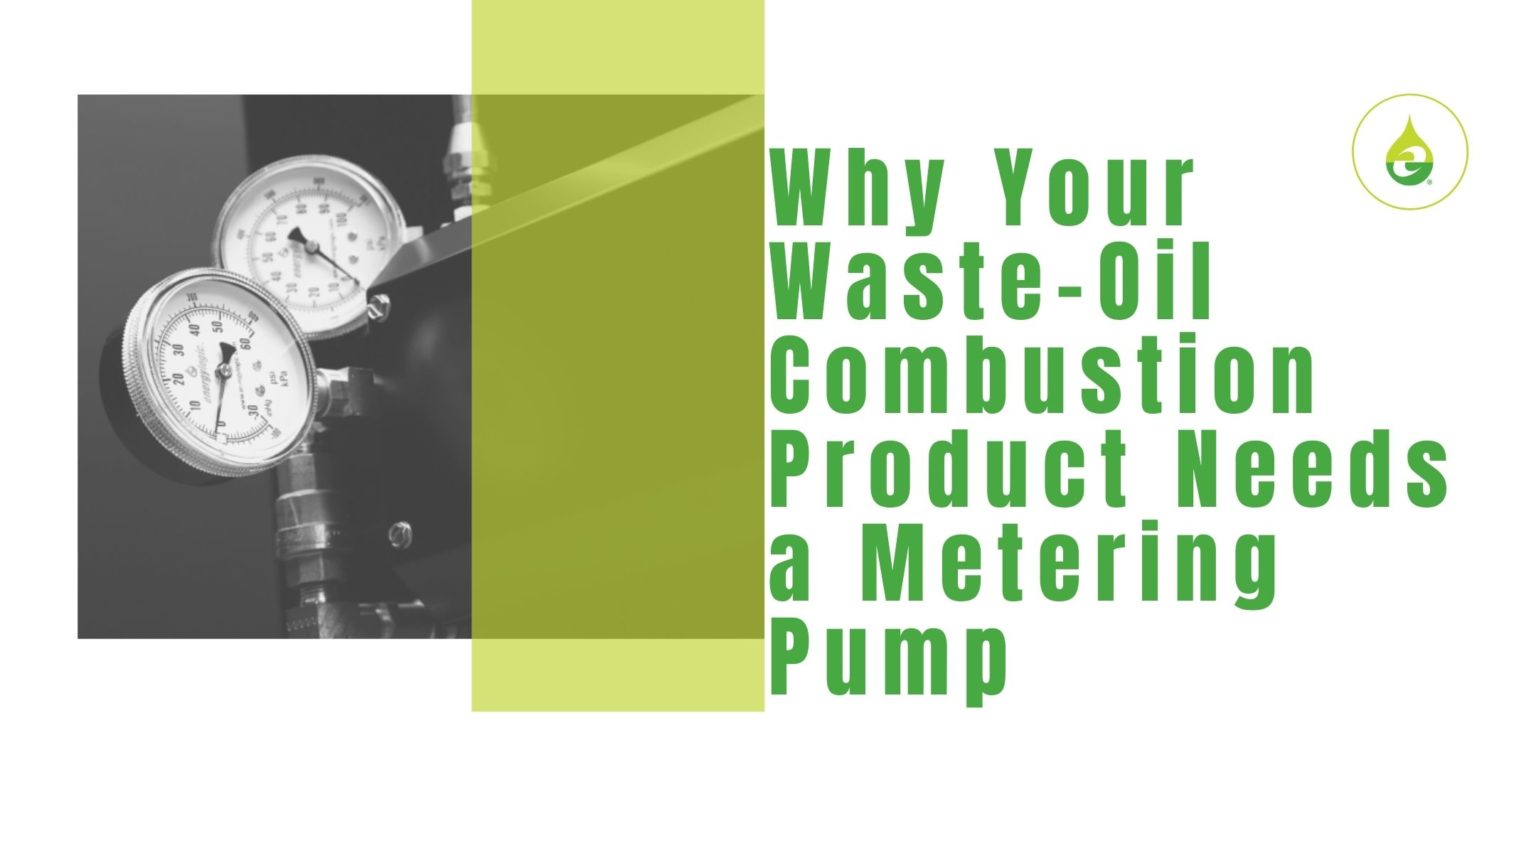 Why Your Waste-Oil Combustion Product Needs a Metering Pump